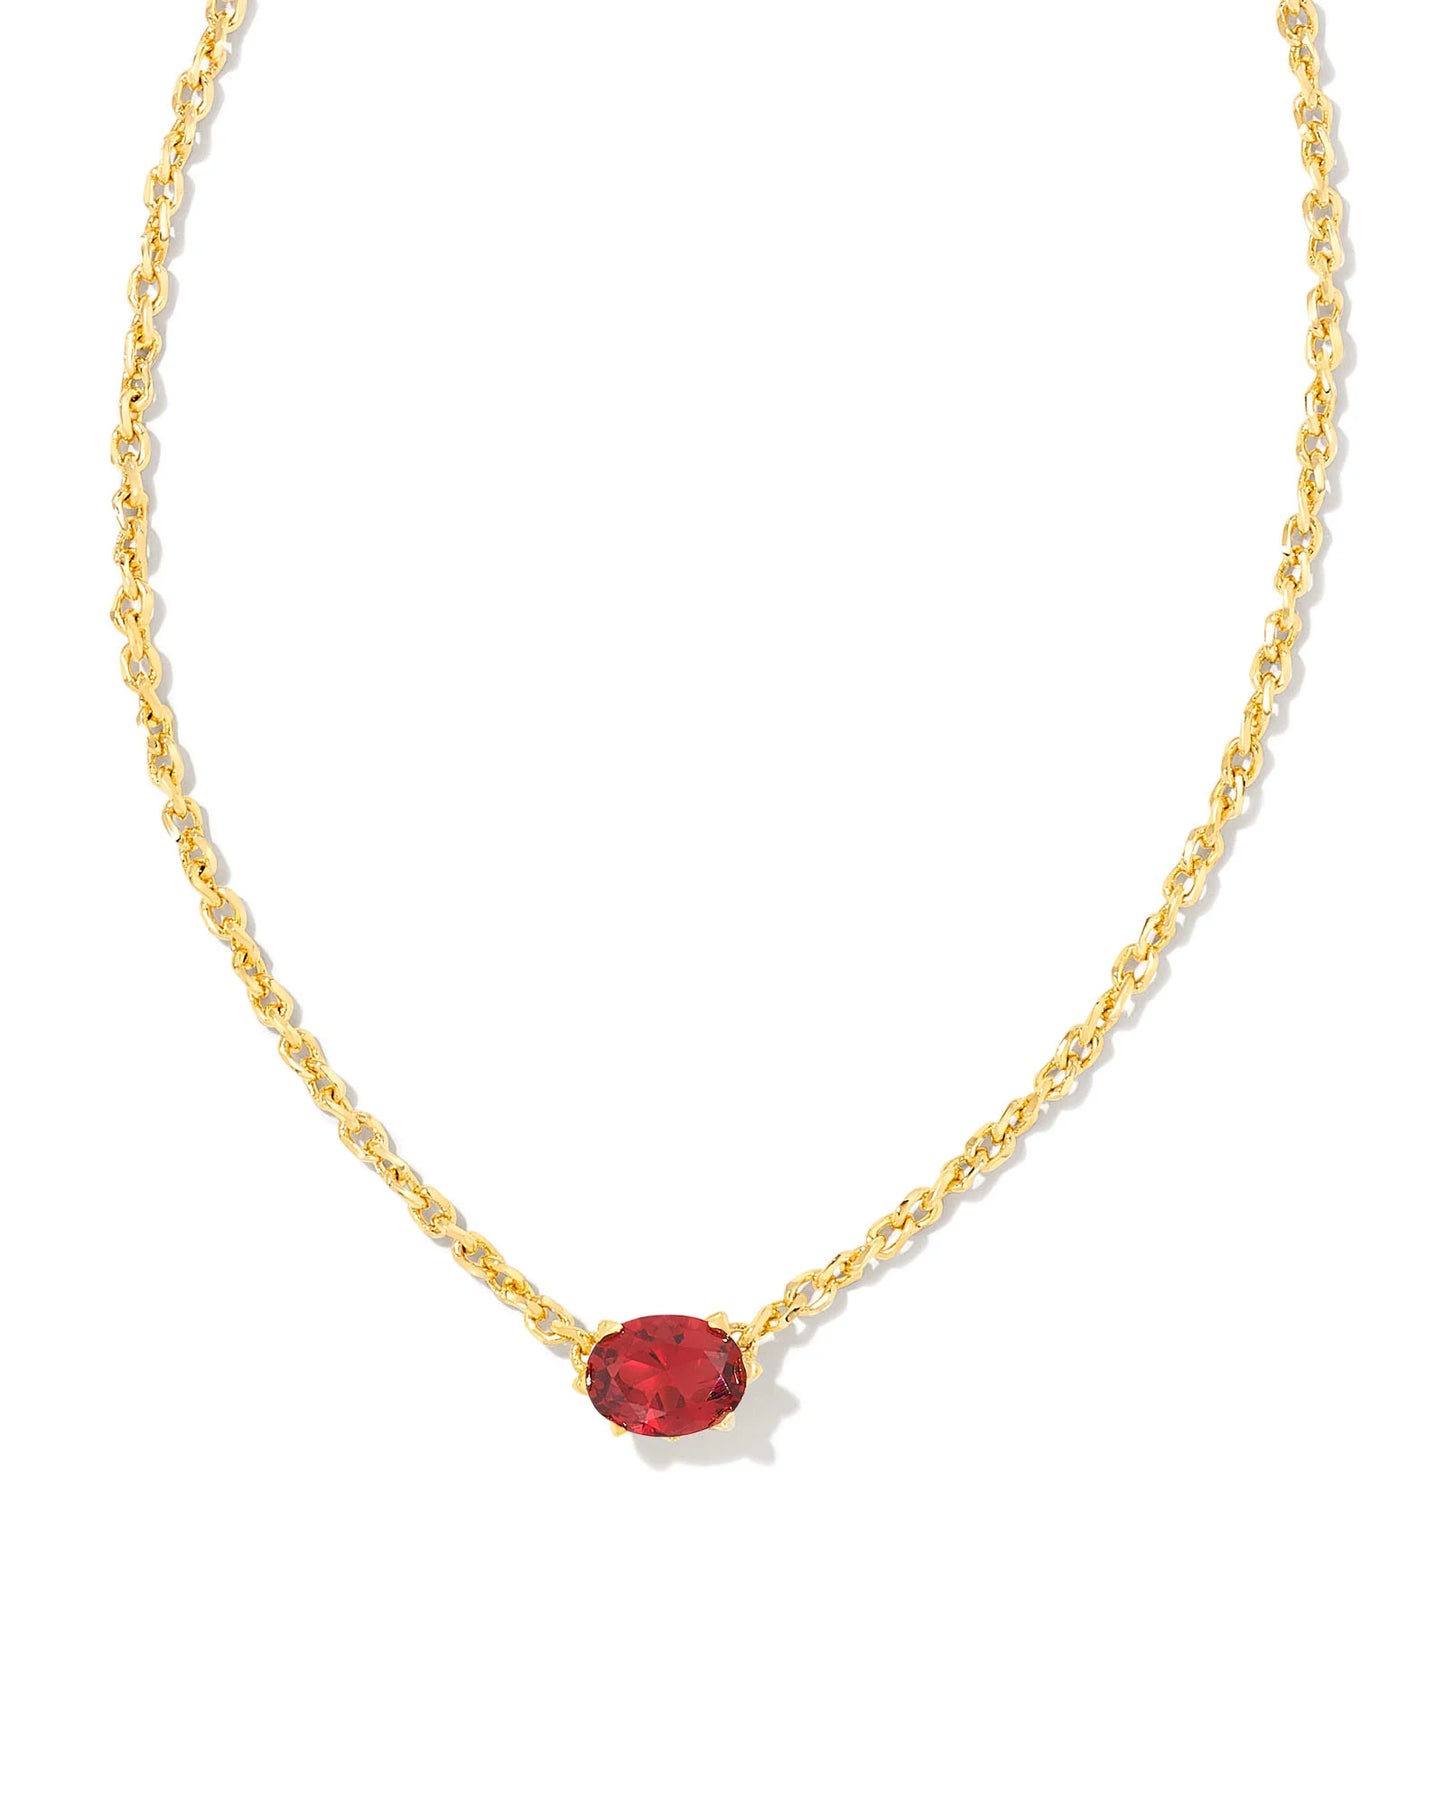 Kendra Scott Cailin Crystal Pendant Necklace Gold Burgundy Crystal-Necklaces-Kendra Scott-N1941GLD-The Twisted Chandelier